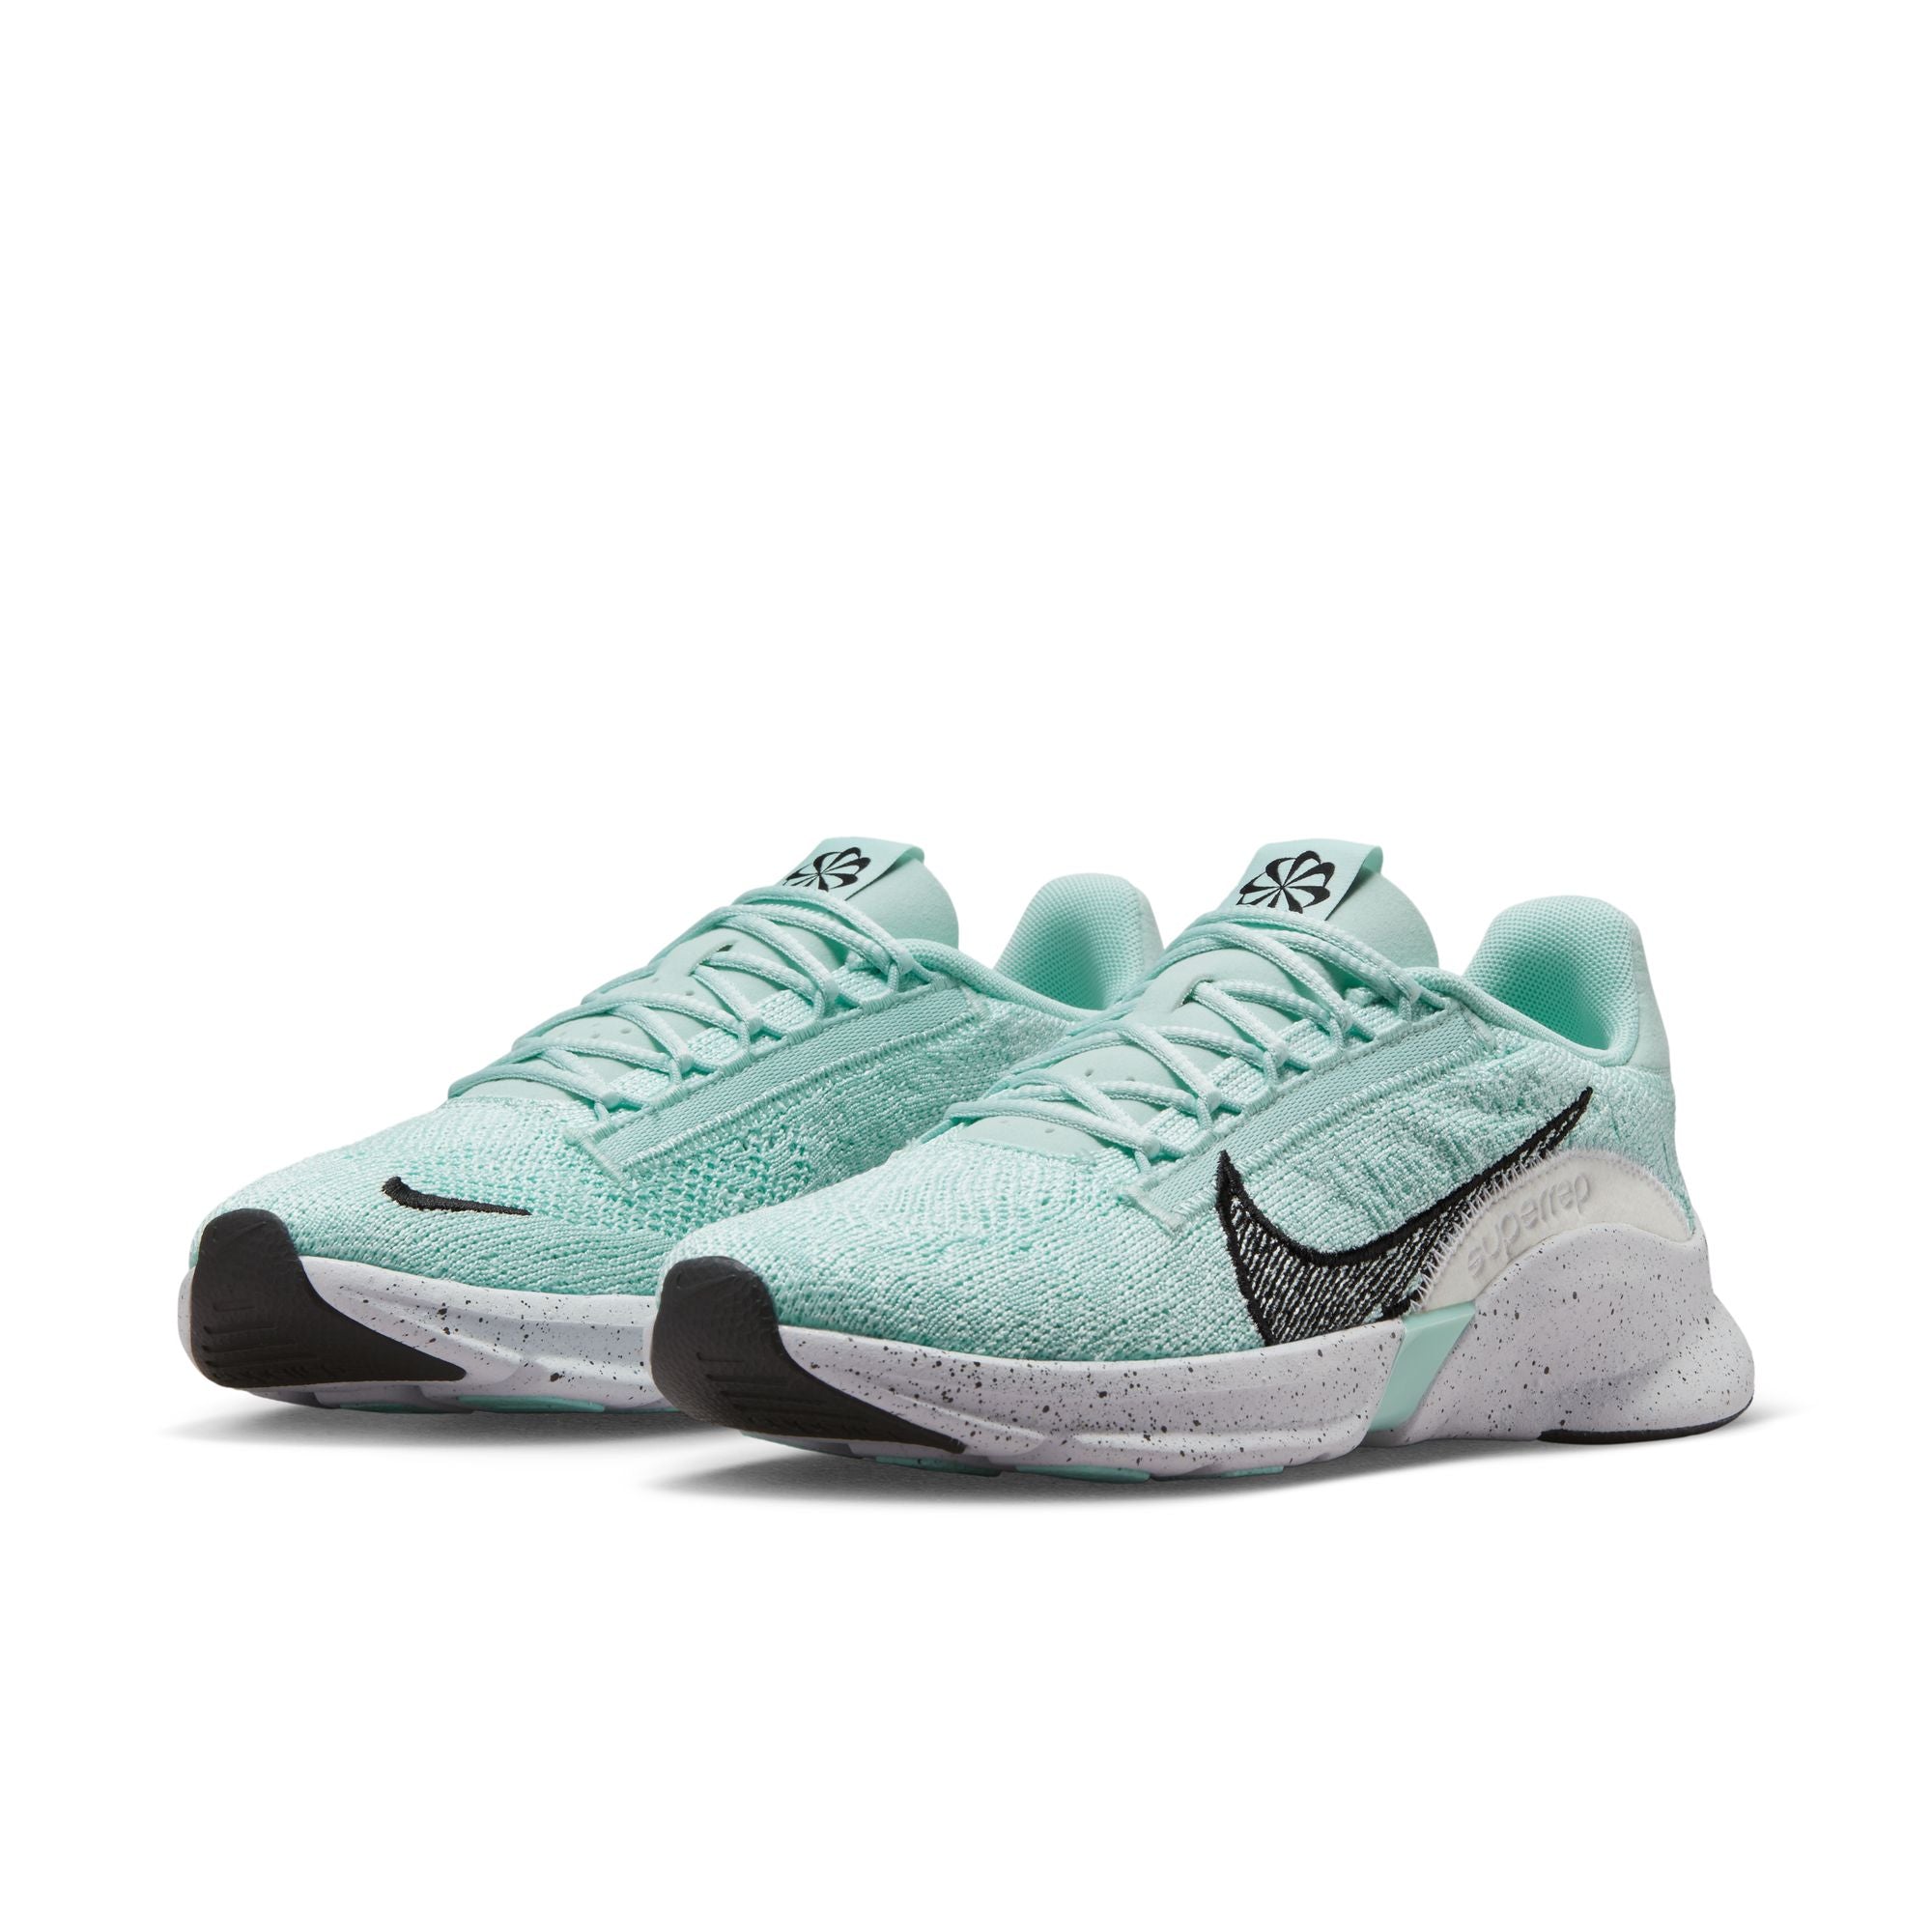 NIKE SUPERREP GO 3 FLYKNIT NEXT NATURE WOMEN'S TRAINING SHOES